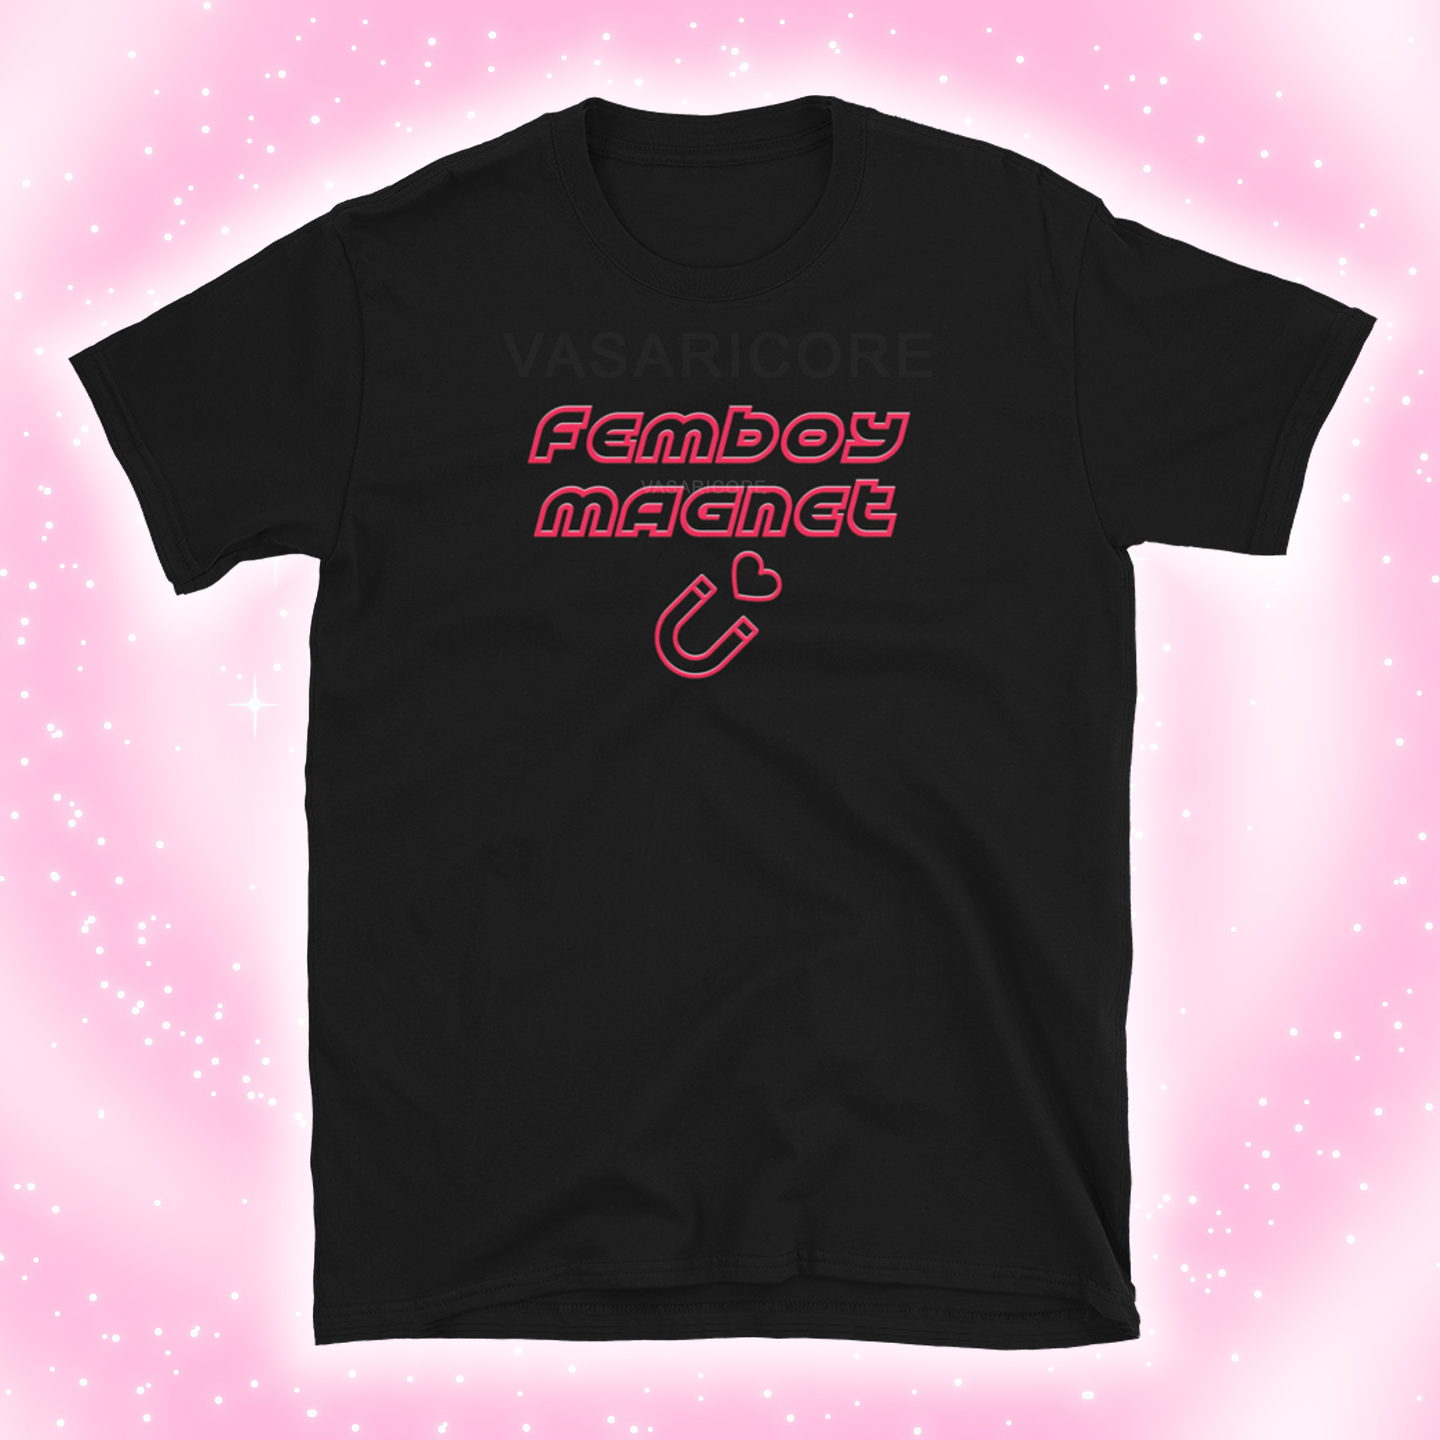 Femboy T-Shirts for Sale